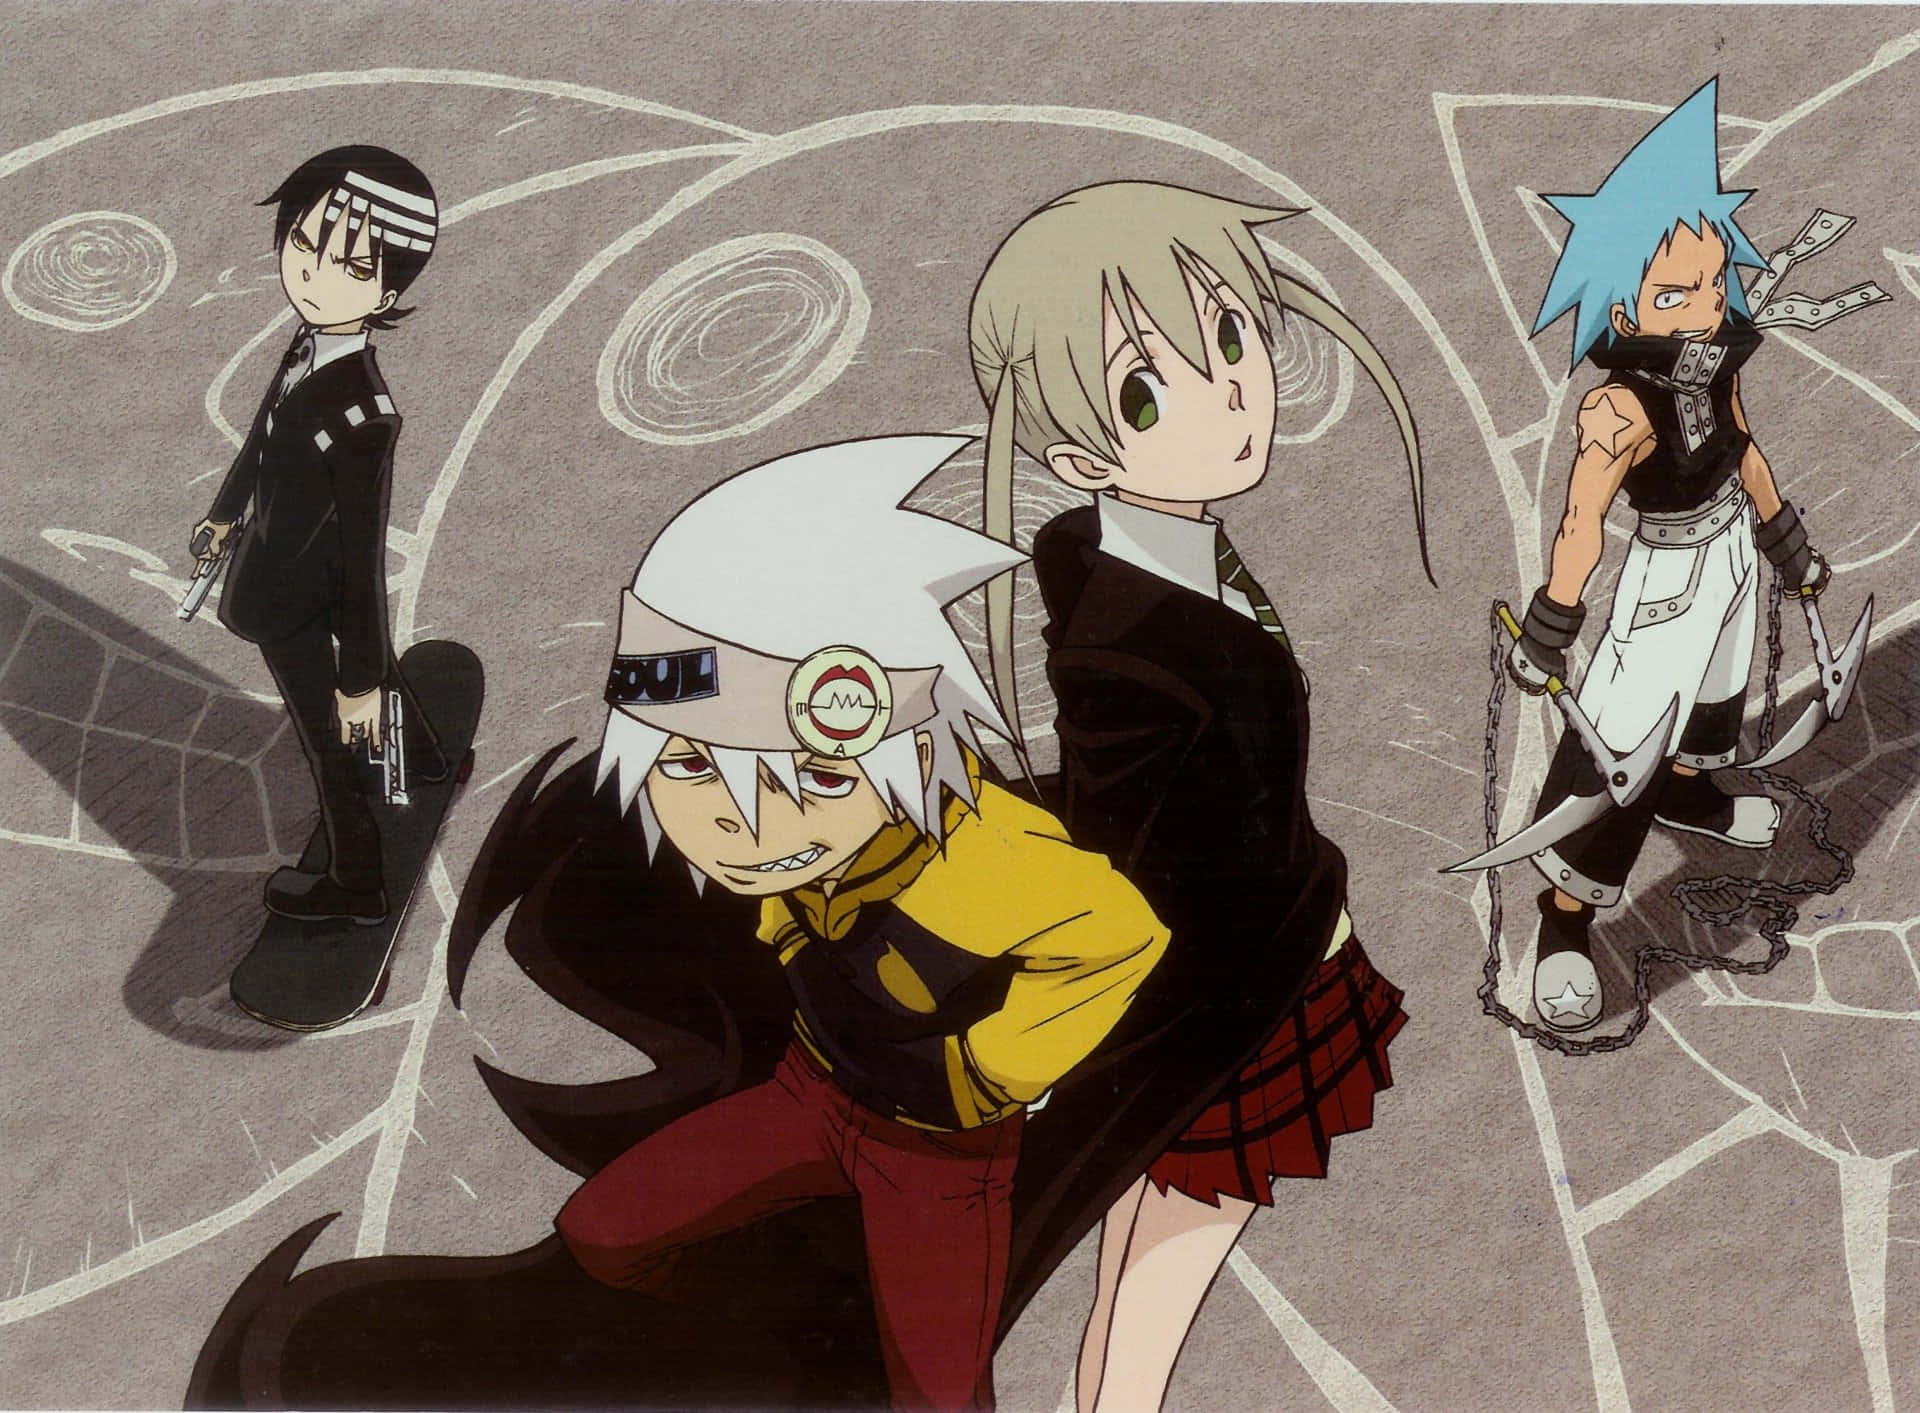 Follow Maka, Soul, Black Star, and Death the Kid on their incredible journey as they hunt witches and evils in ‘Soul Eater’ Manga. Wallpaper